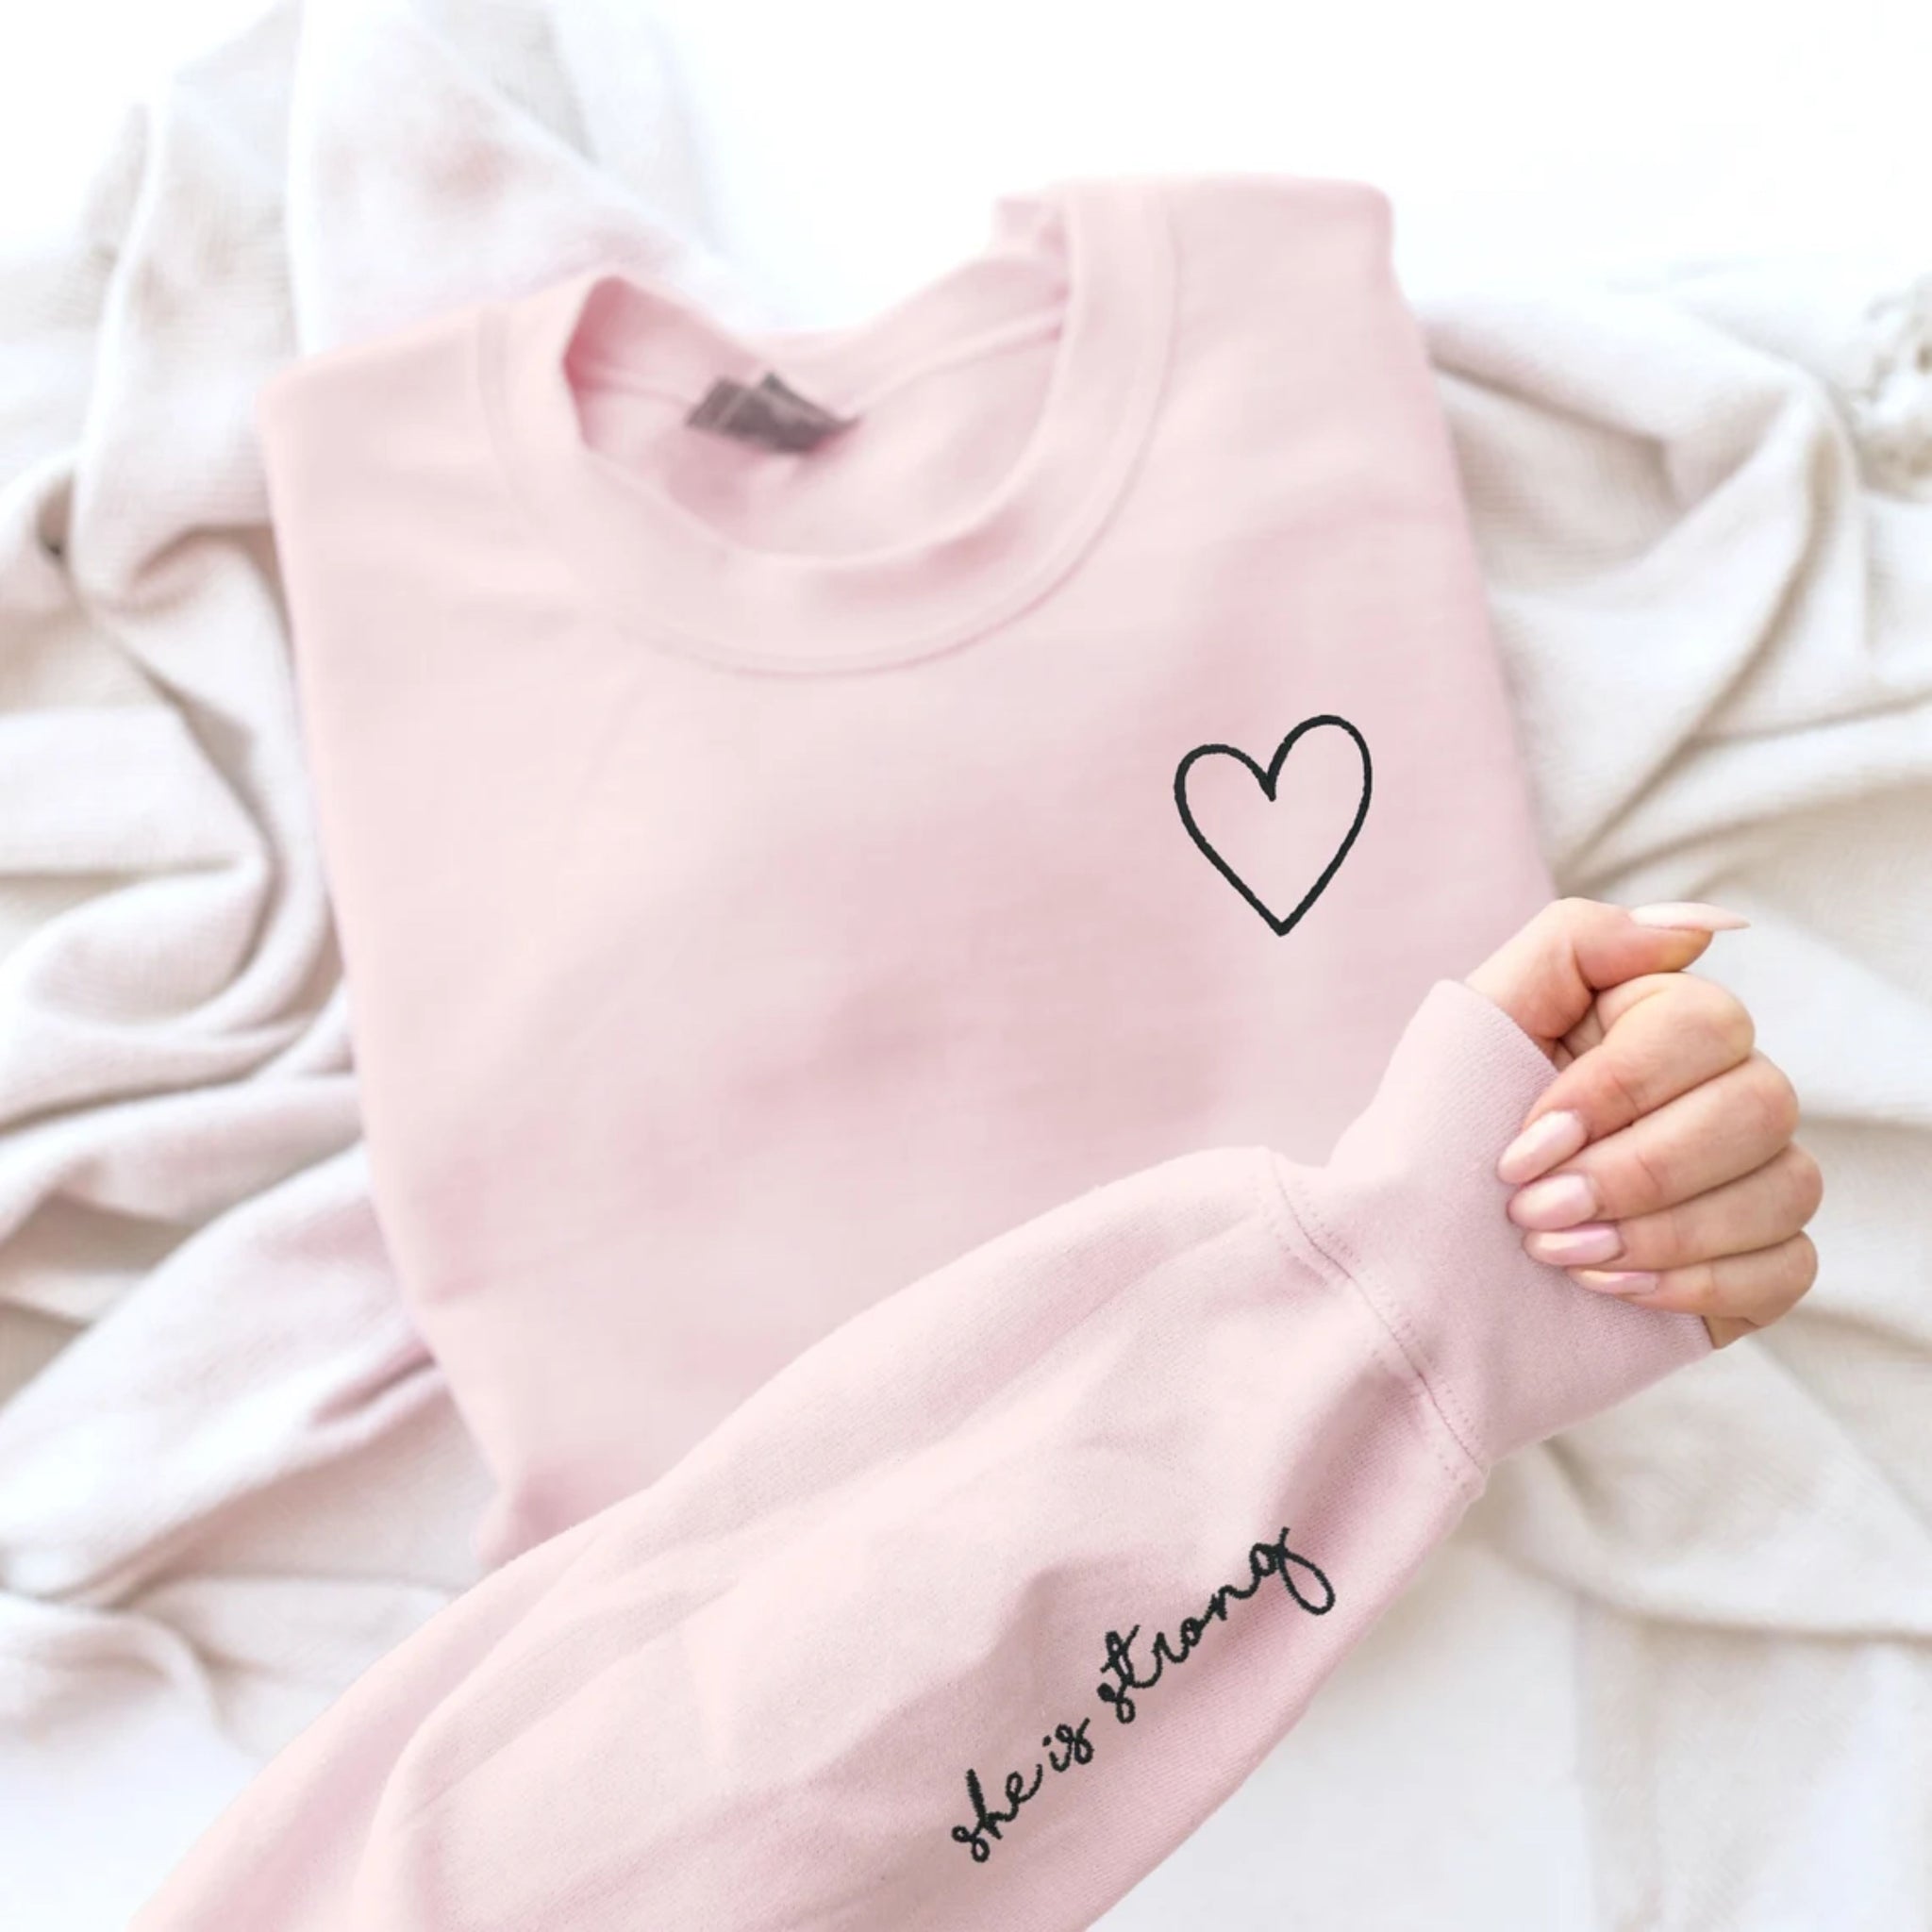 She is Strong Embroidered Sweatshirt